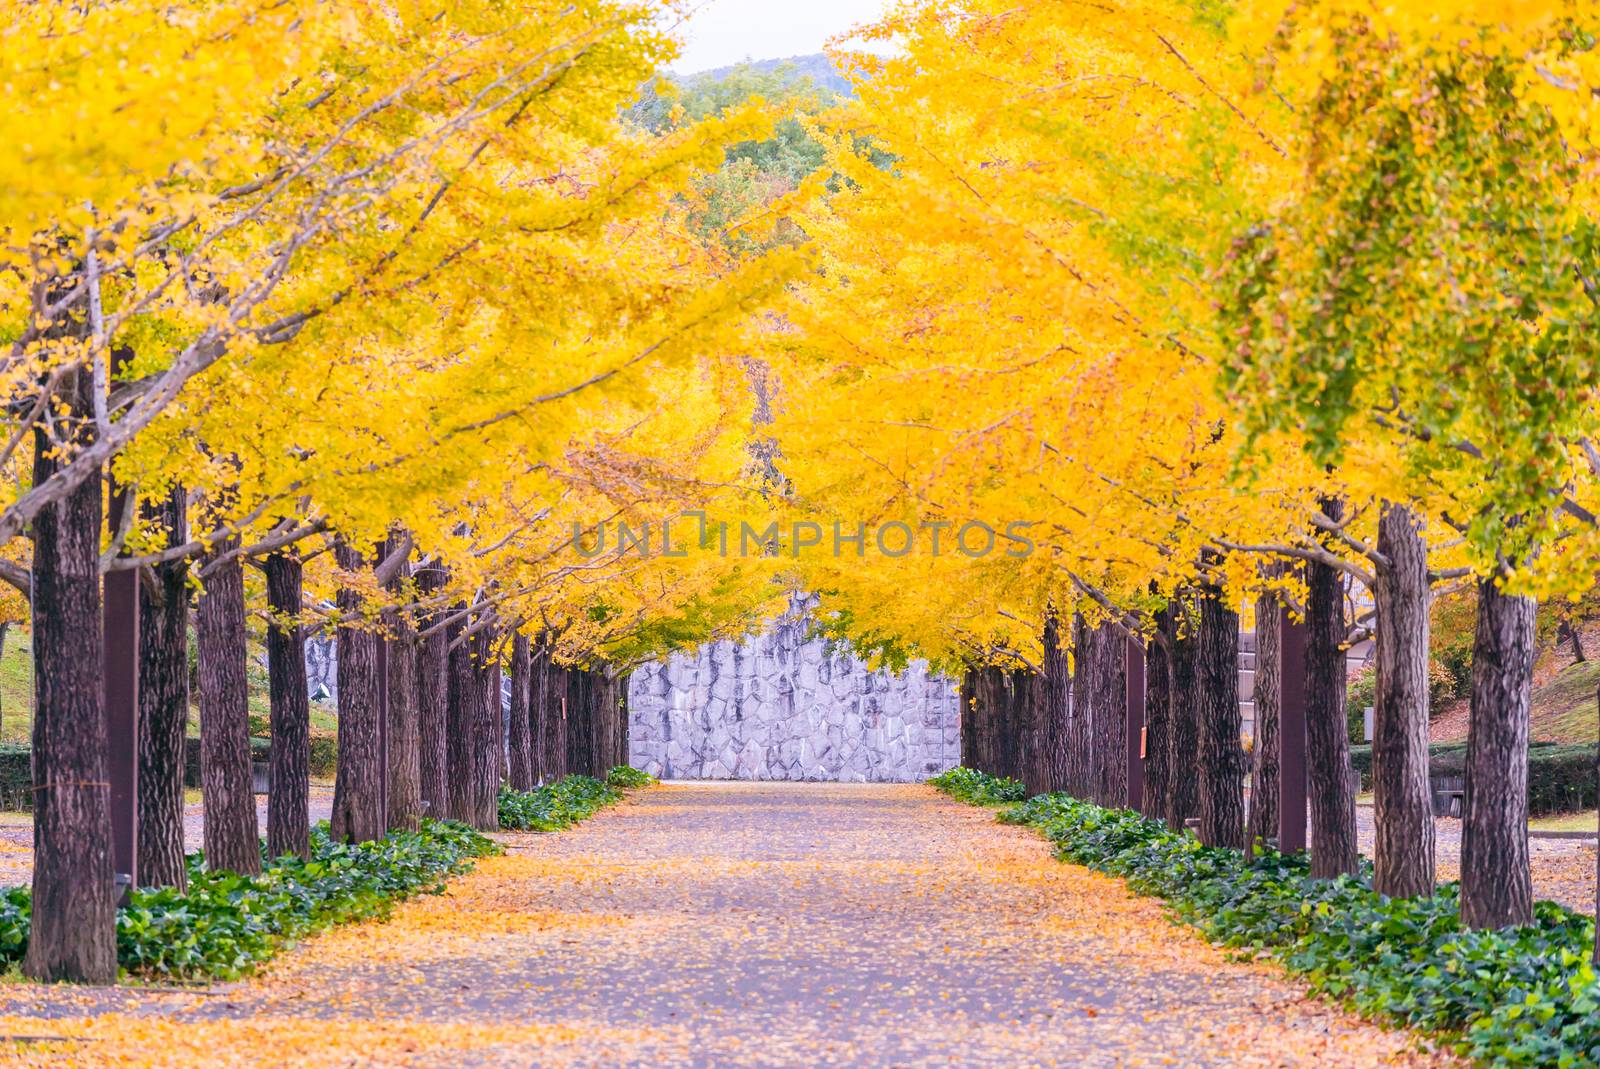 Ginkgo Road by vichie81